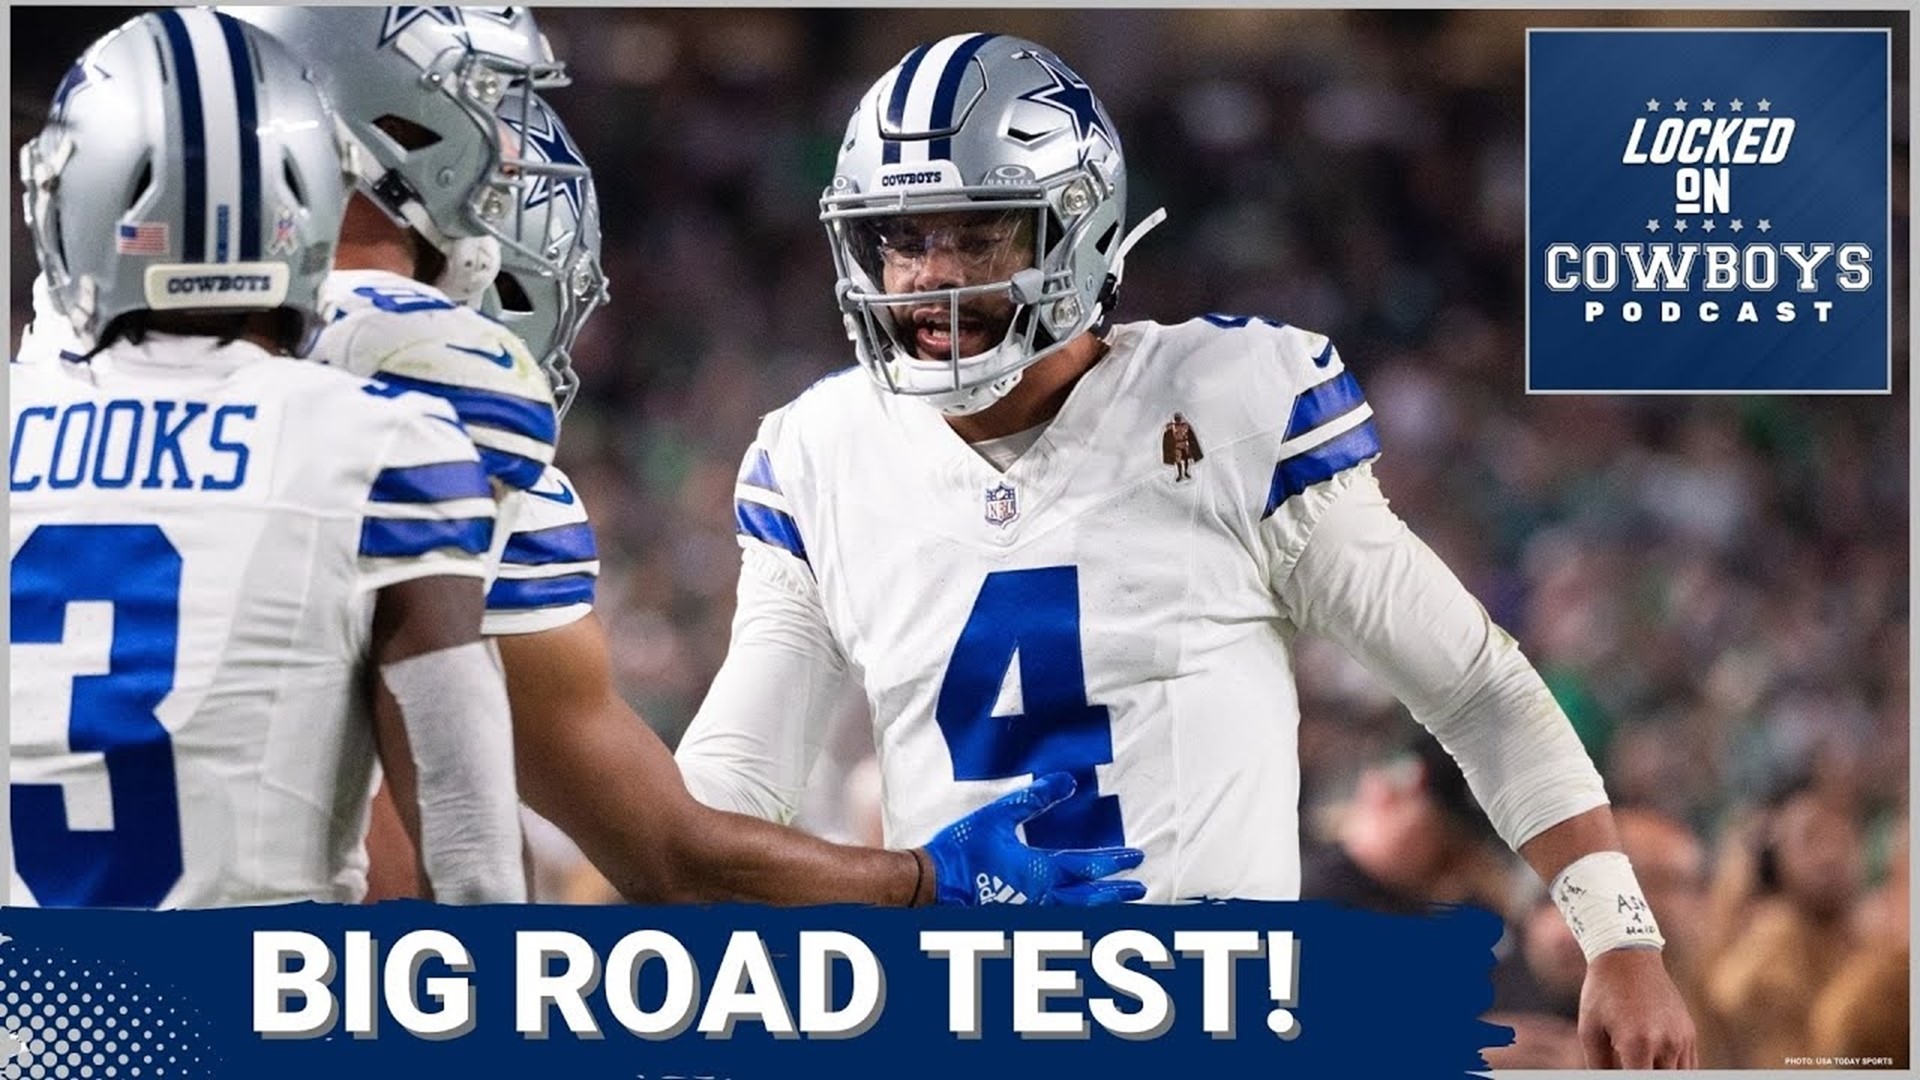 The Dallas Cowboys have another big test ahead of them, facing the Bills in Buffalo. Can the Cowboys get their first big road win over the season?